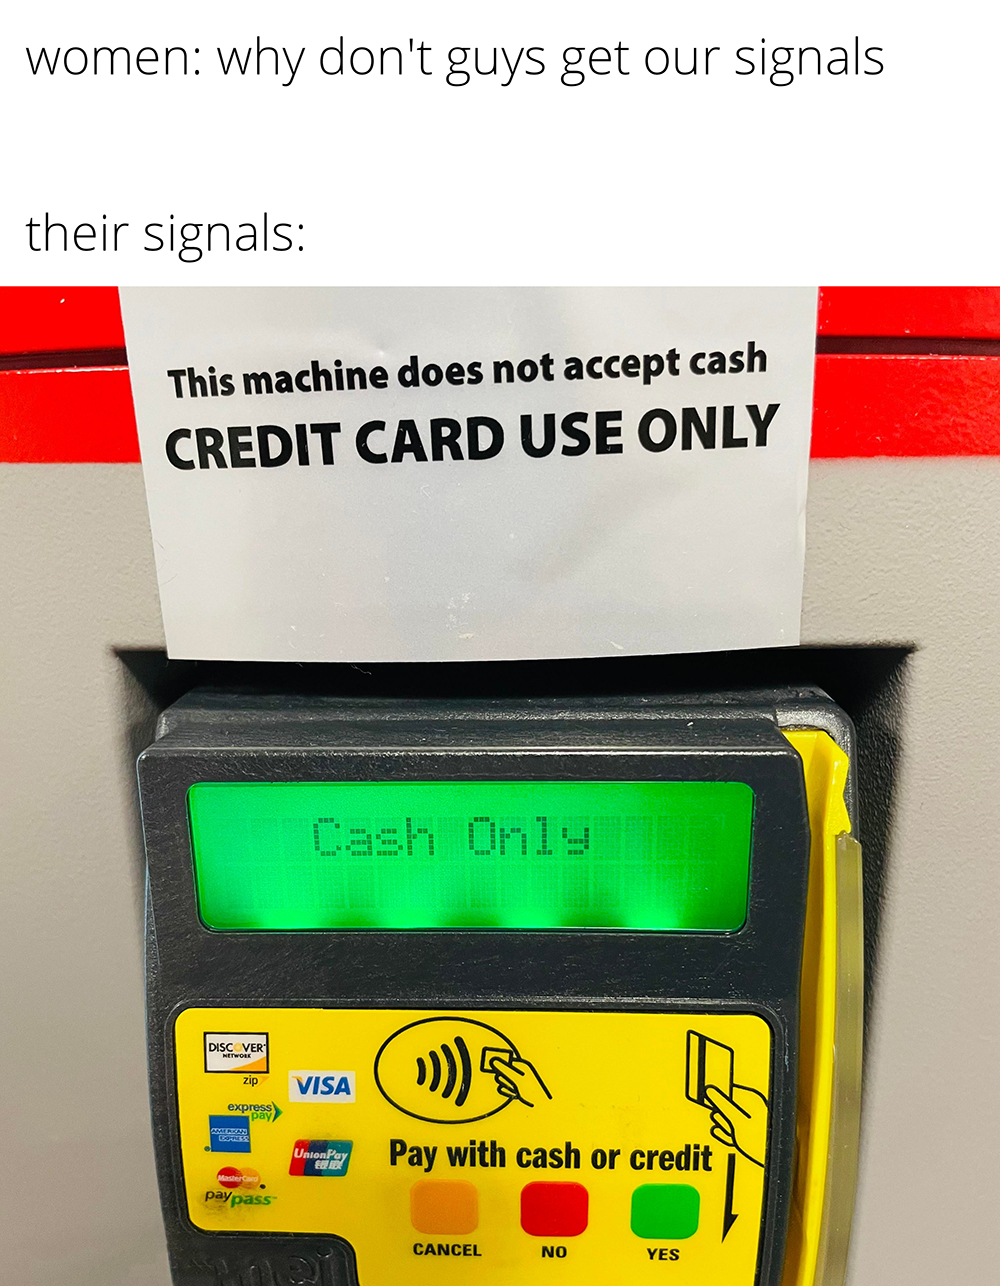 dank memes - funny memes - measuring instrument - women why don't guys get our signals their signals This machine does not accept cash Credit Card Use Only Cash Only Visa Do you Parse 21 Tax Pay with cash or credit Cancel No Yes